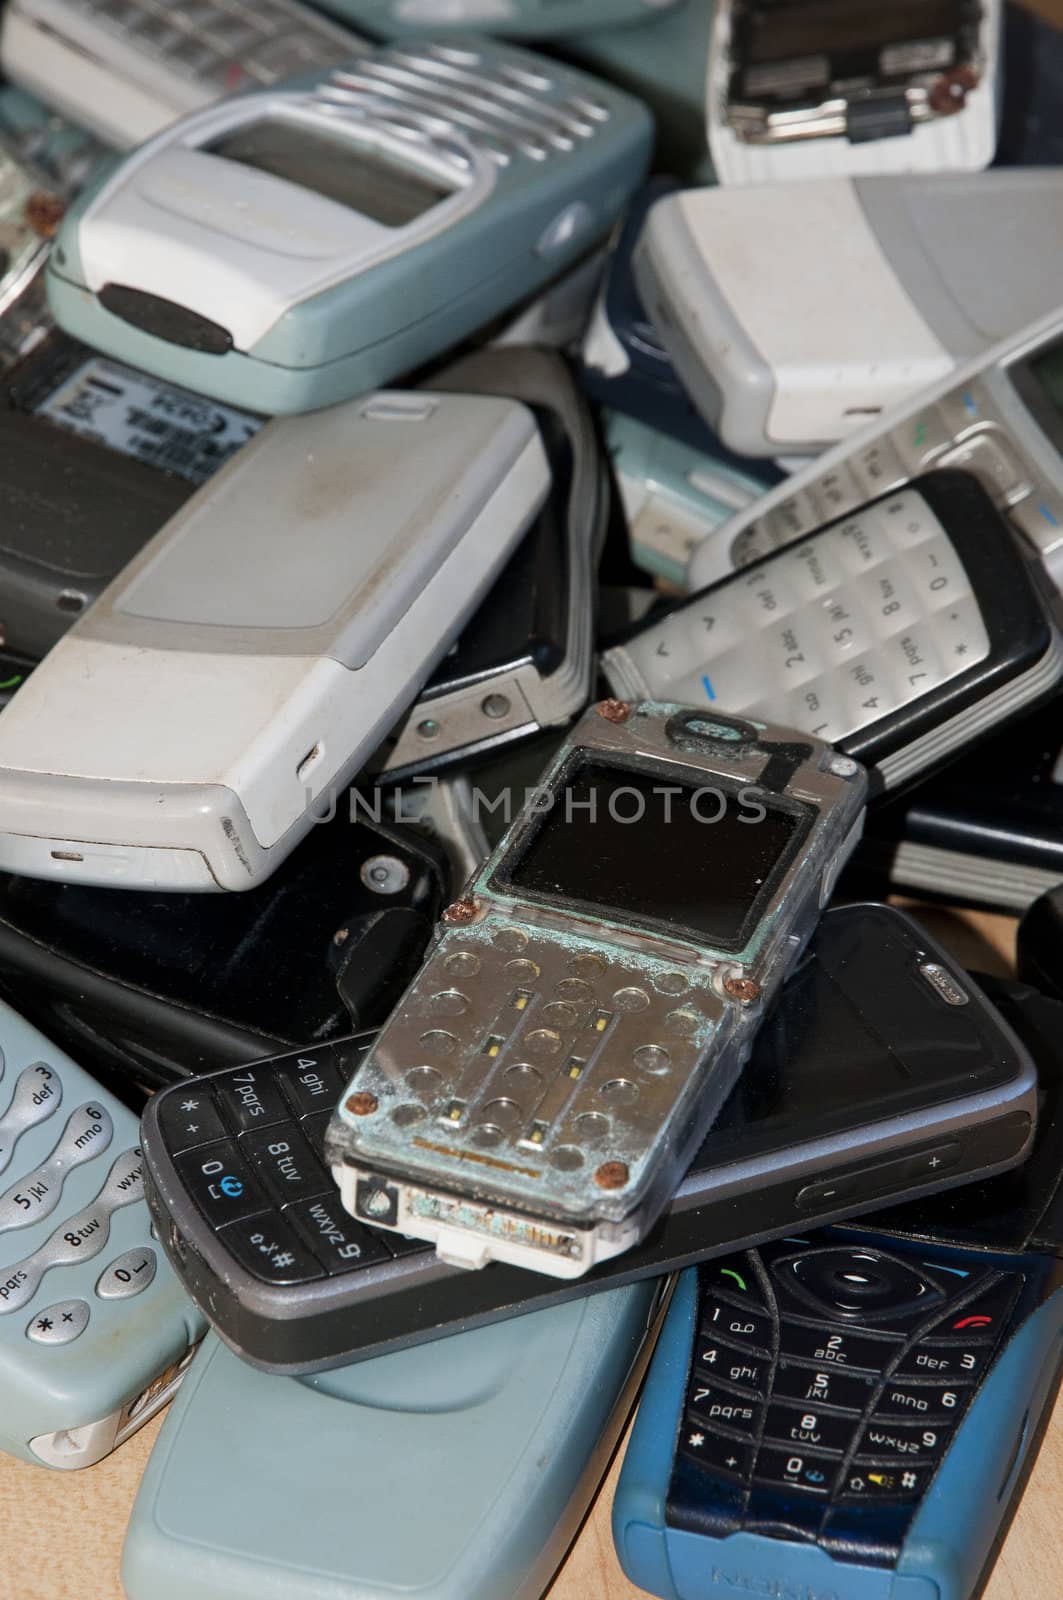 Close-up on an old mobile phones stack by shkyo30